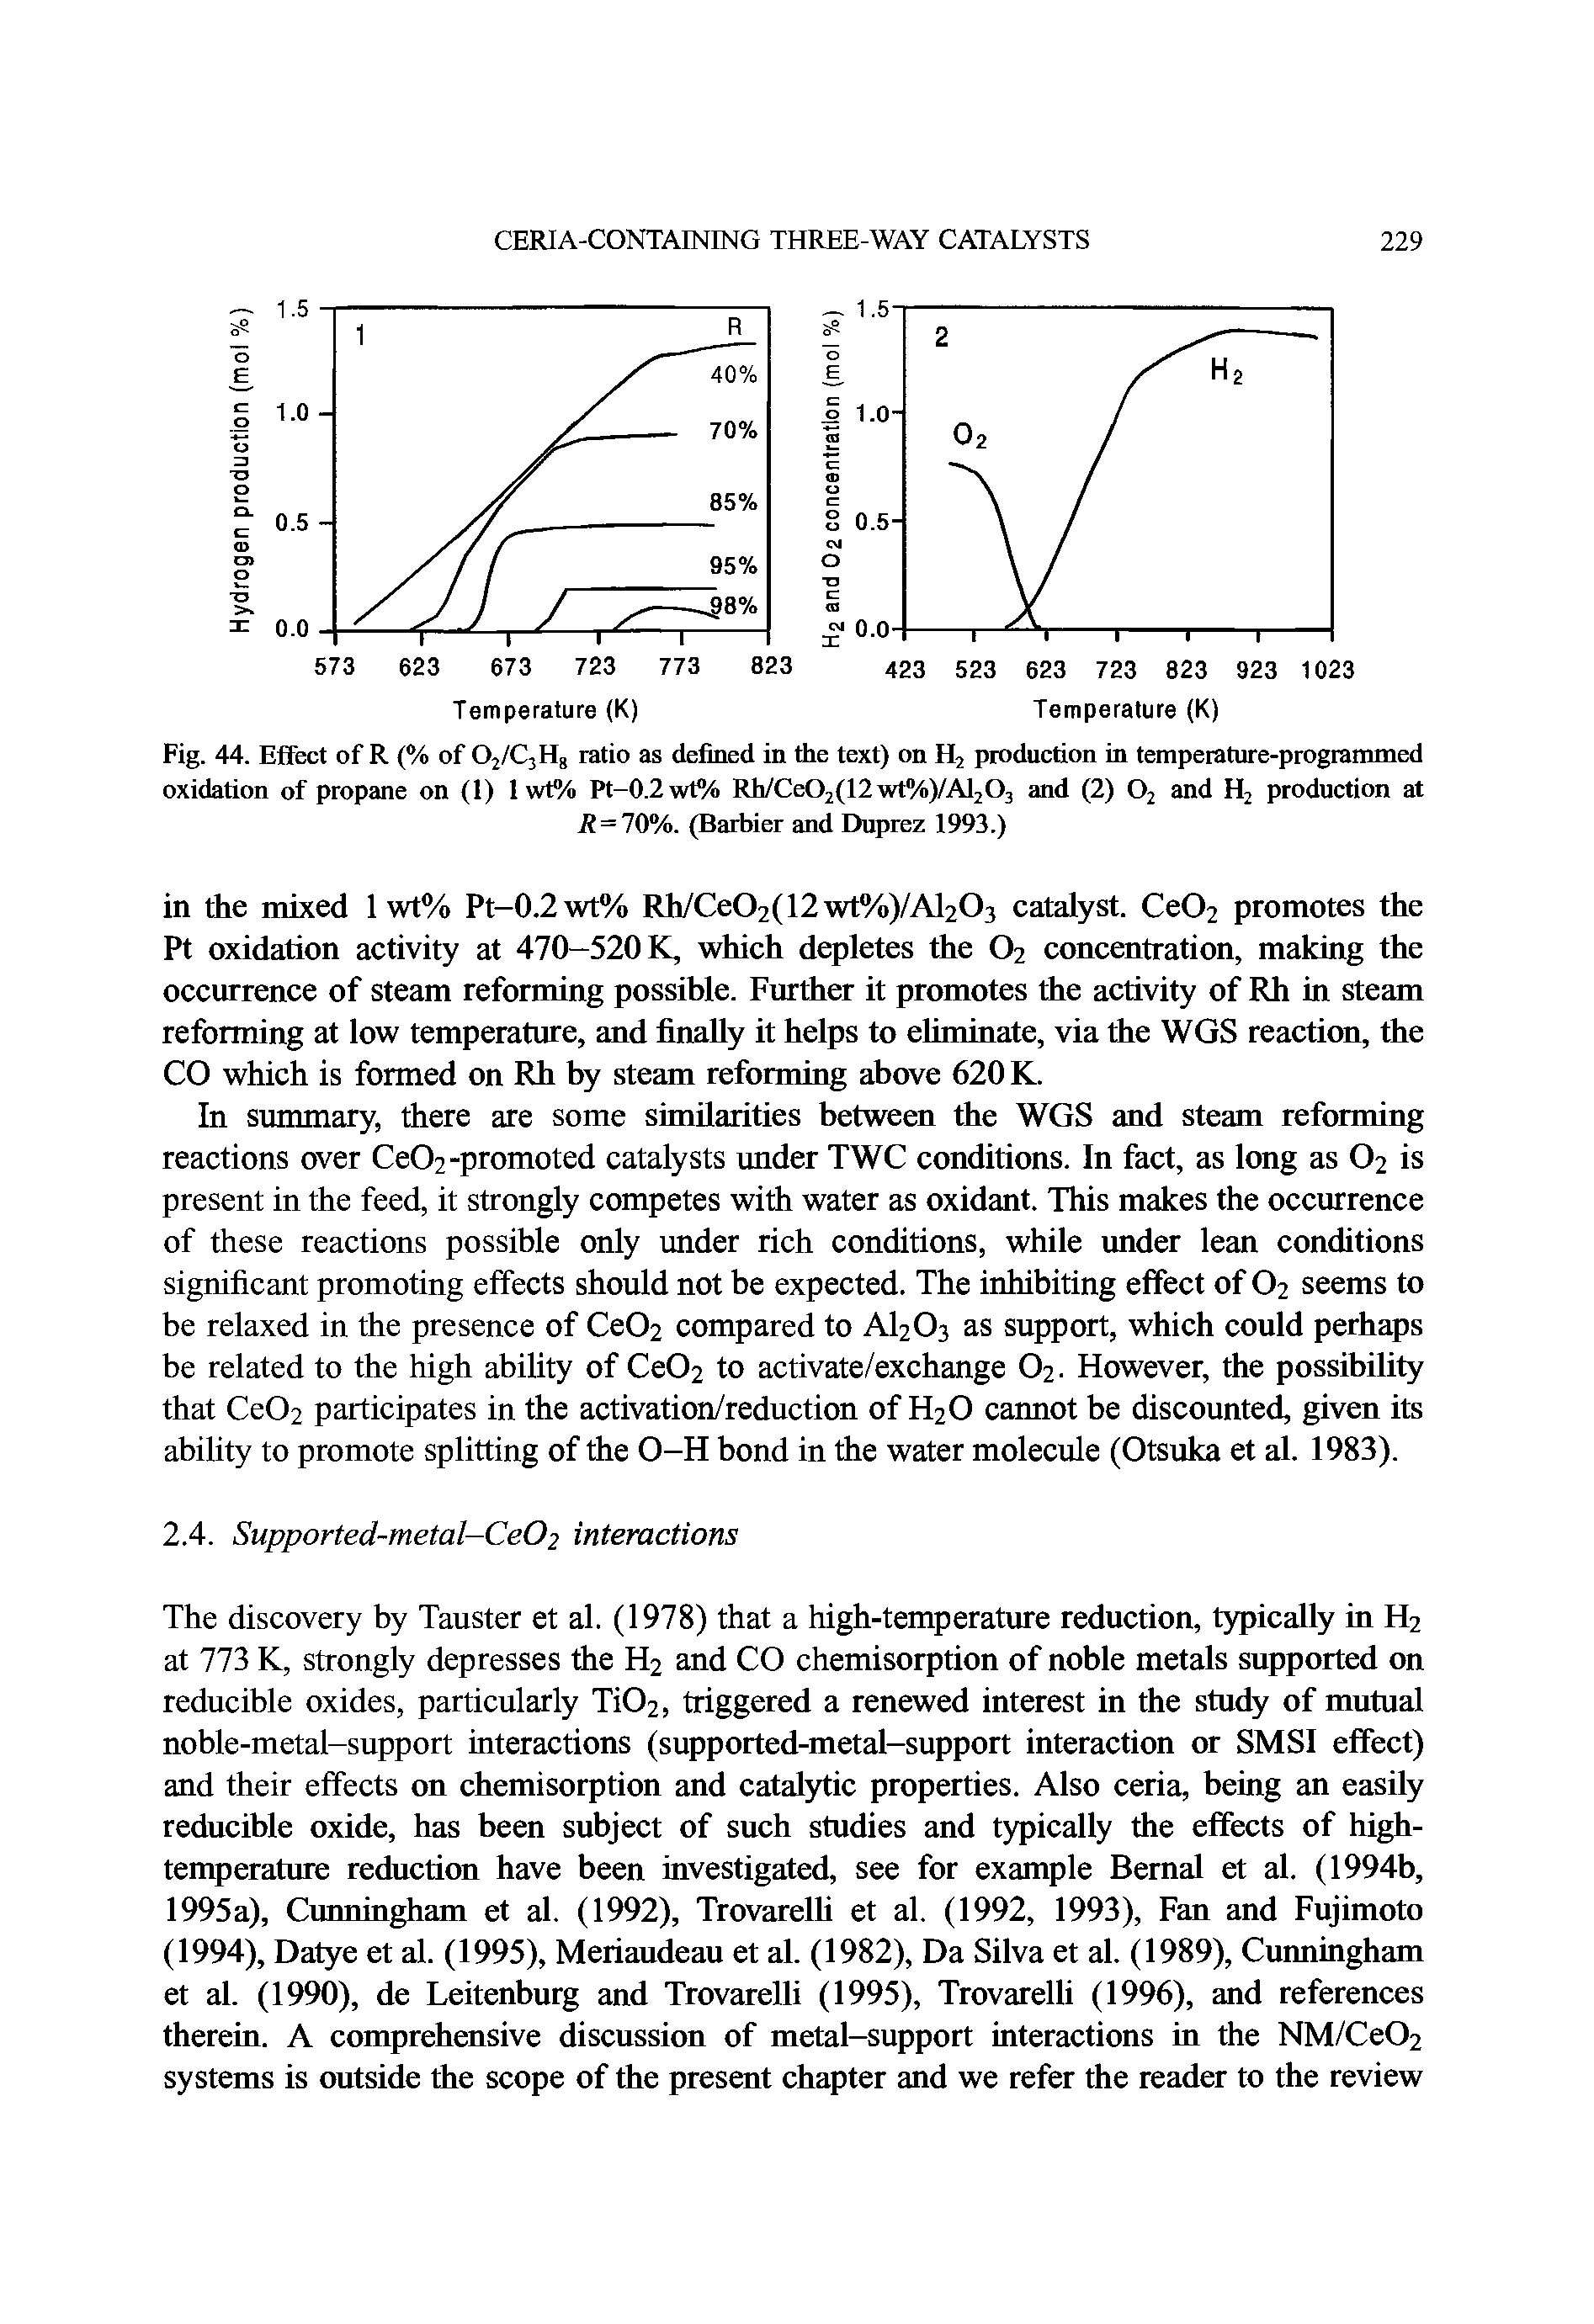 Fig. 44. Effect of R (% of 02/C3H8 ratio as defined in the text) on H2 production in temperature-programmed oxidation of propane on (1) 1 wt% Pt-0.2wt% Rh/Ce02(i2wt%)/Al203 and (2) 02 and H2 production at...